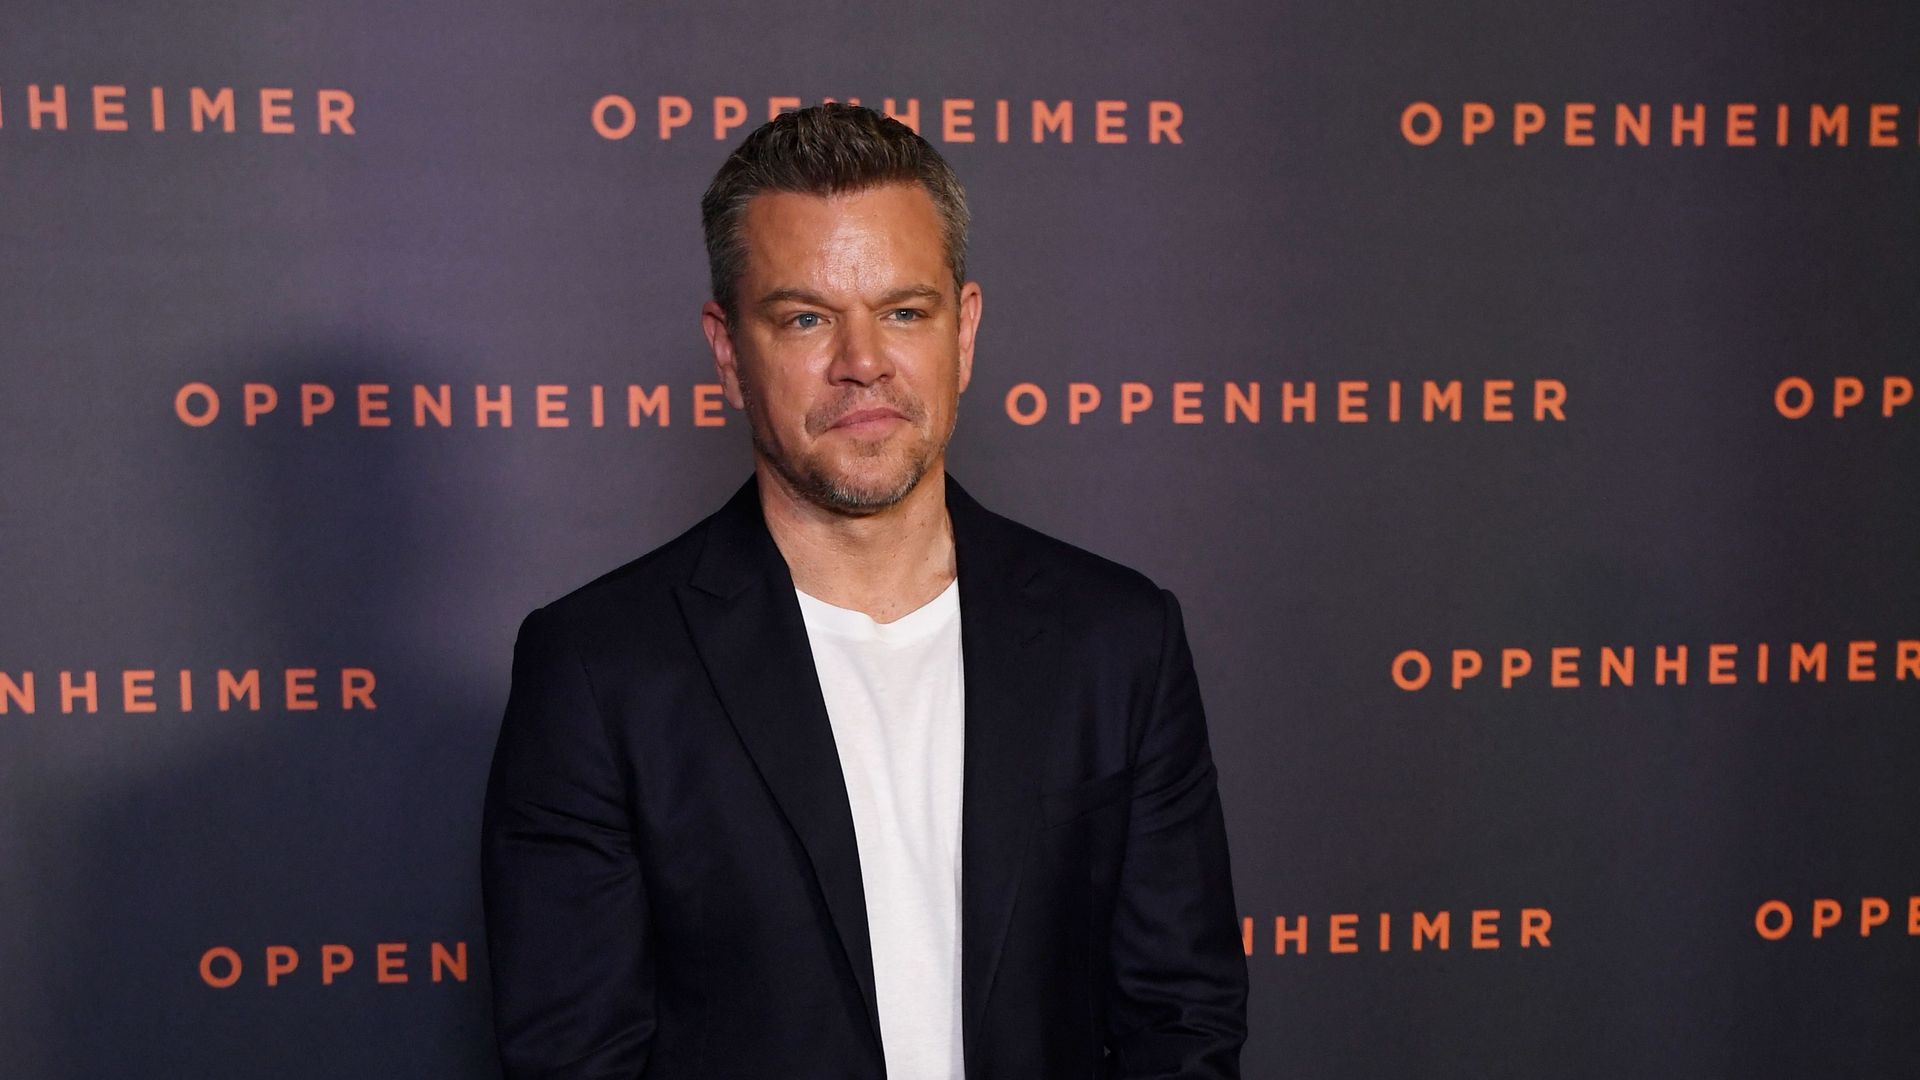 Matt Damon poses upon his arrival for the "Premiere" of the movie "Oppenheimer" at the Grand Rex cinema in Paris on July 11, 2023G